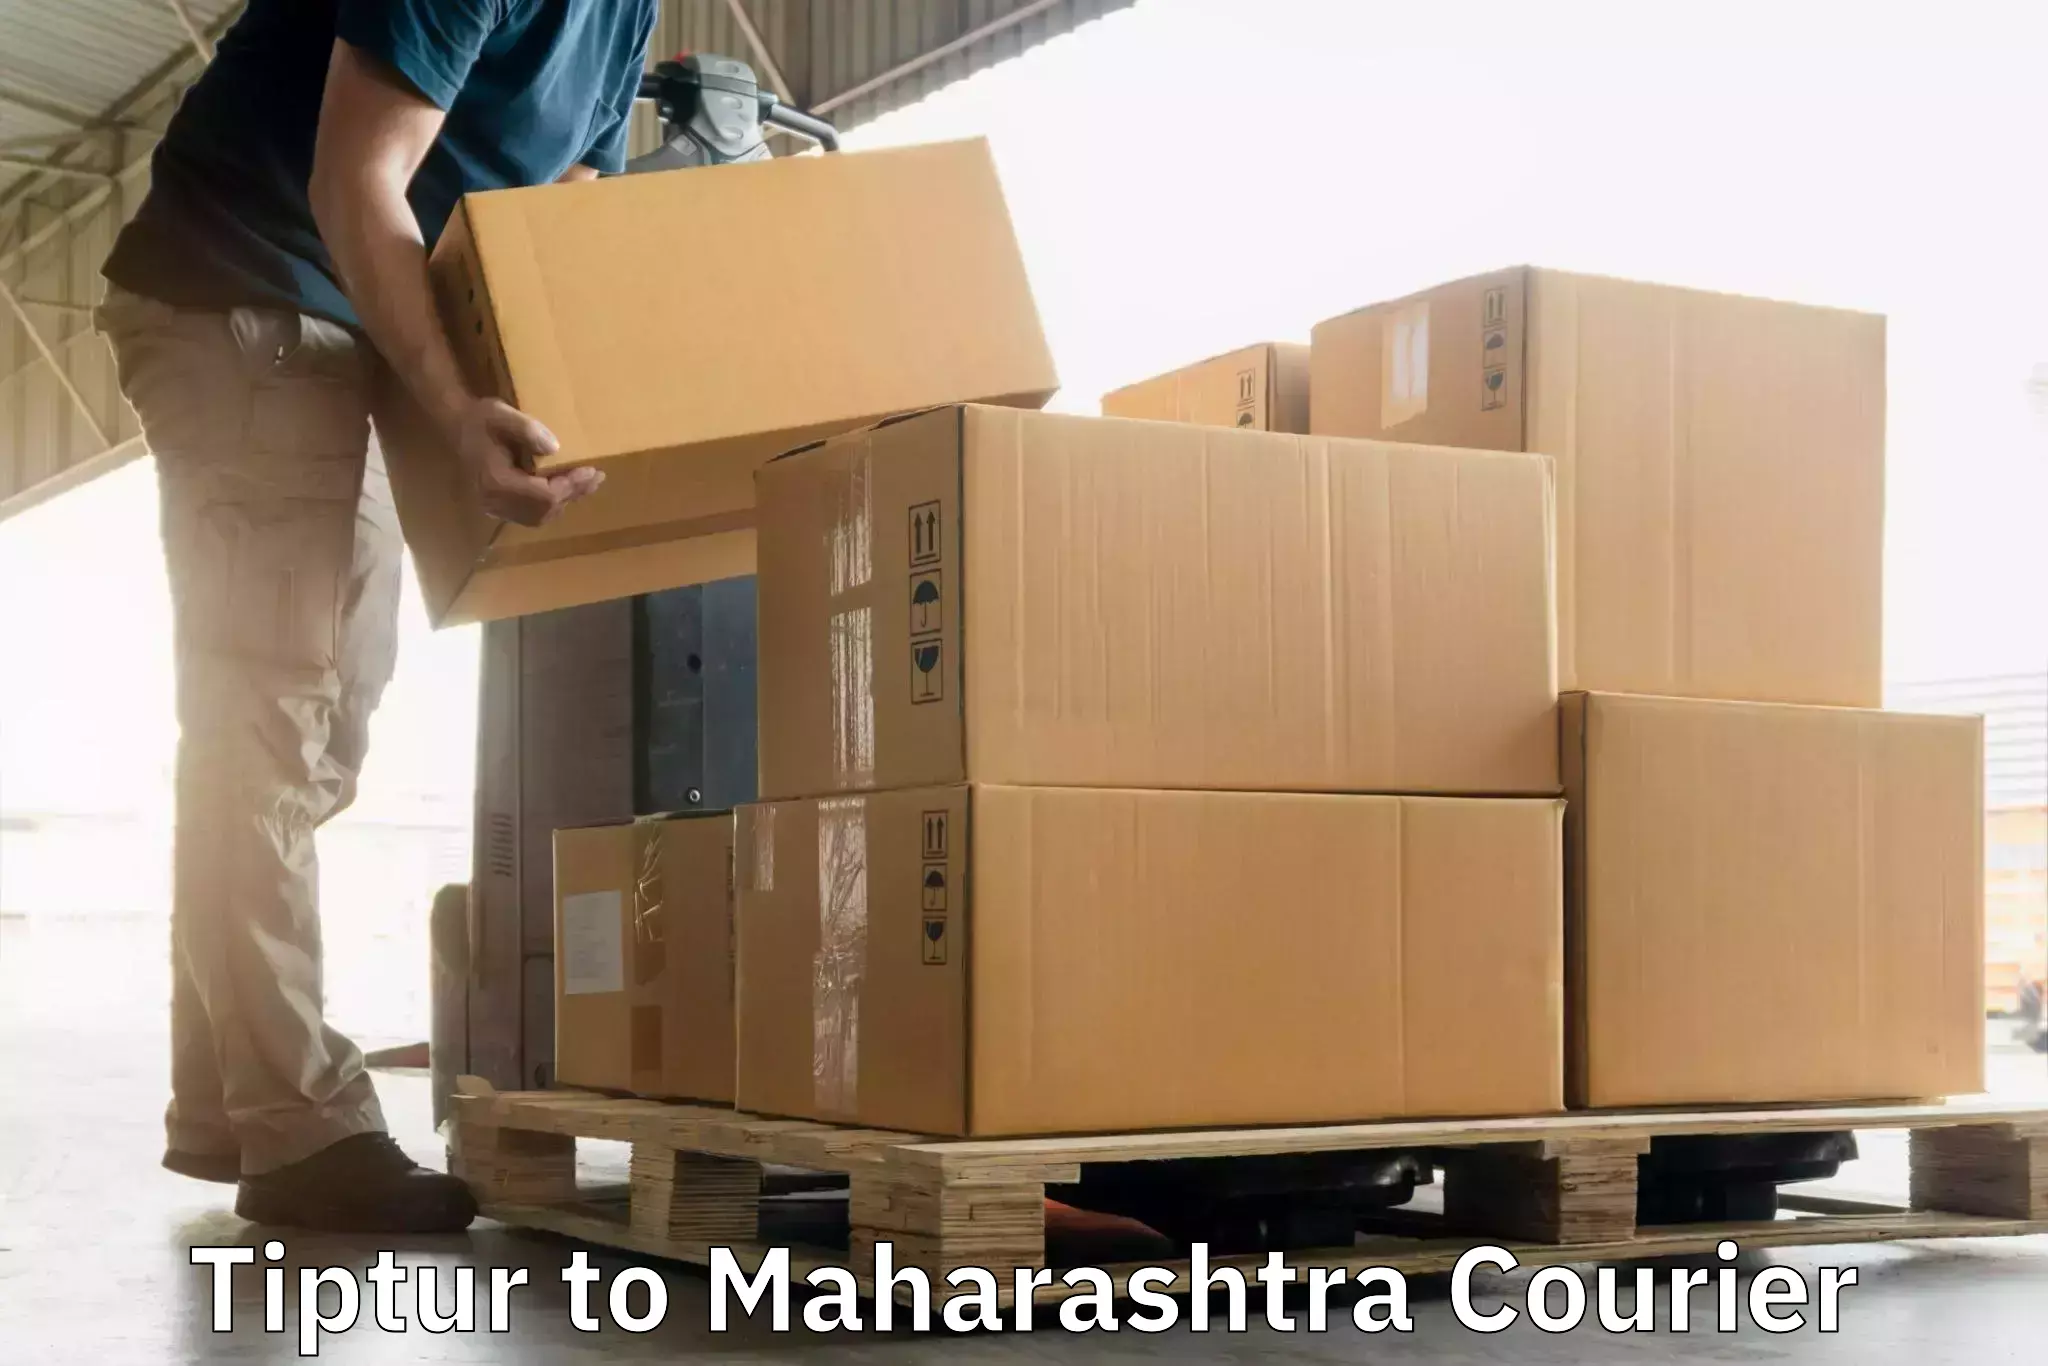 Round-the-clock parcel delivery Tiptur to Pune